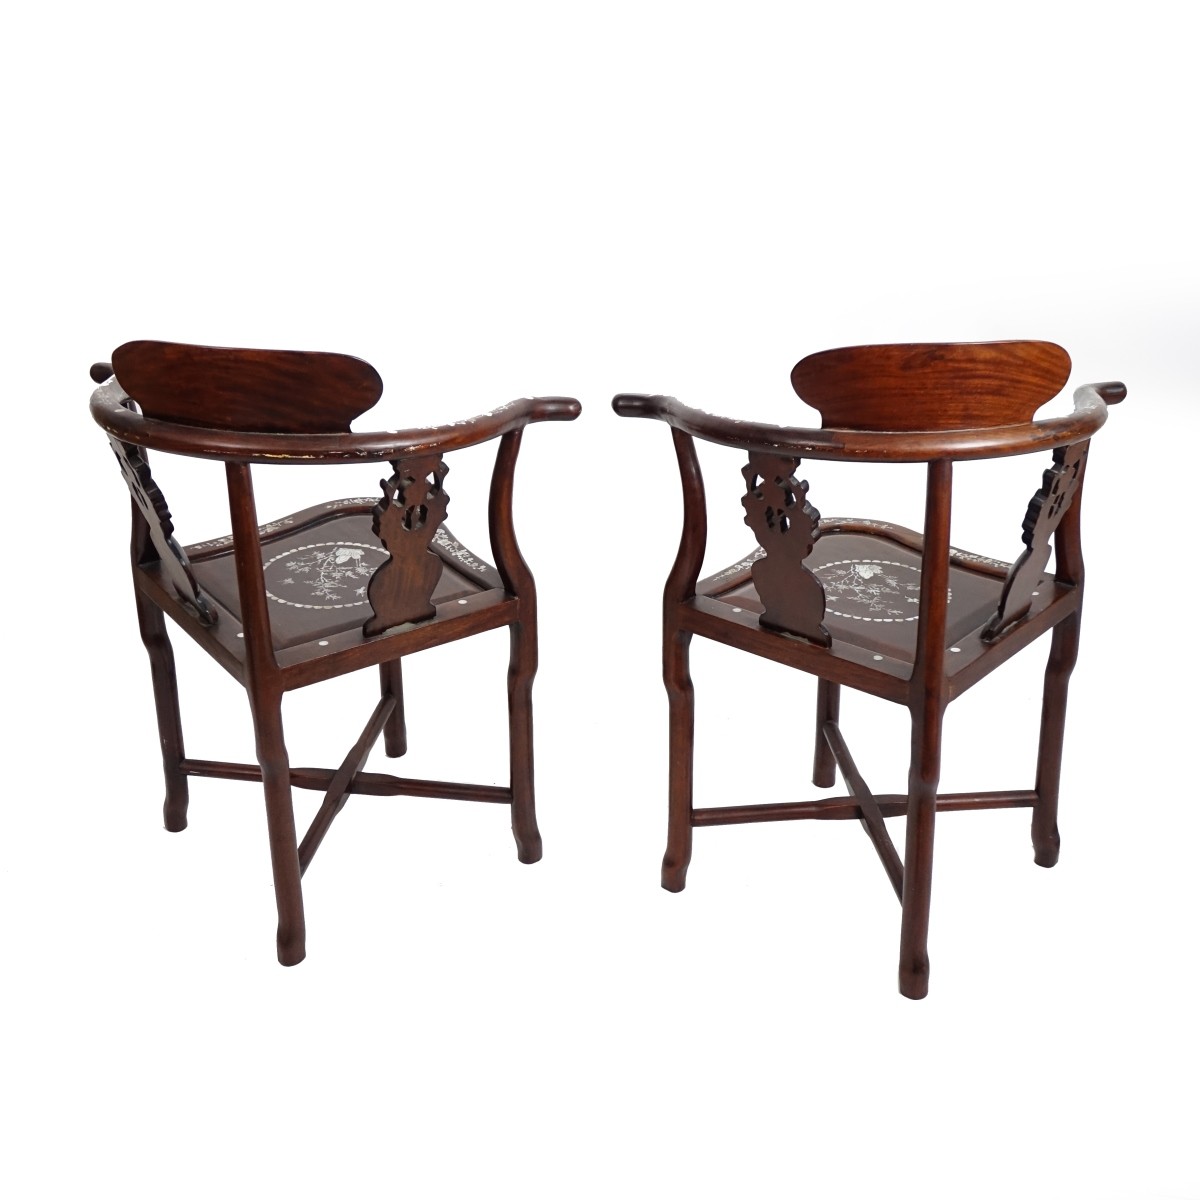 Pair of Chinese Hardwood/MOP Chairs